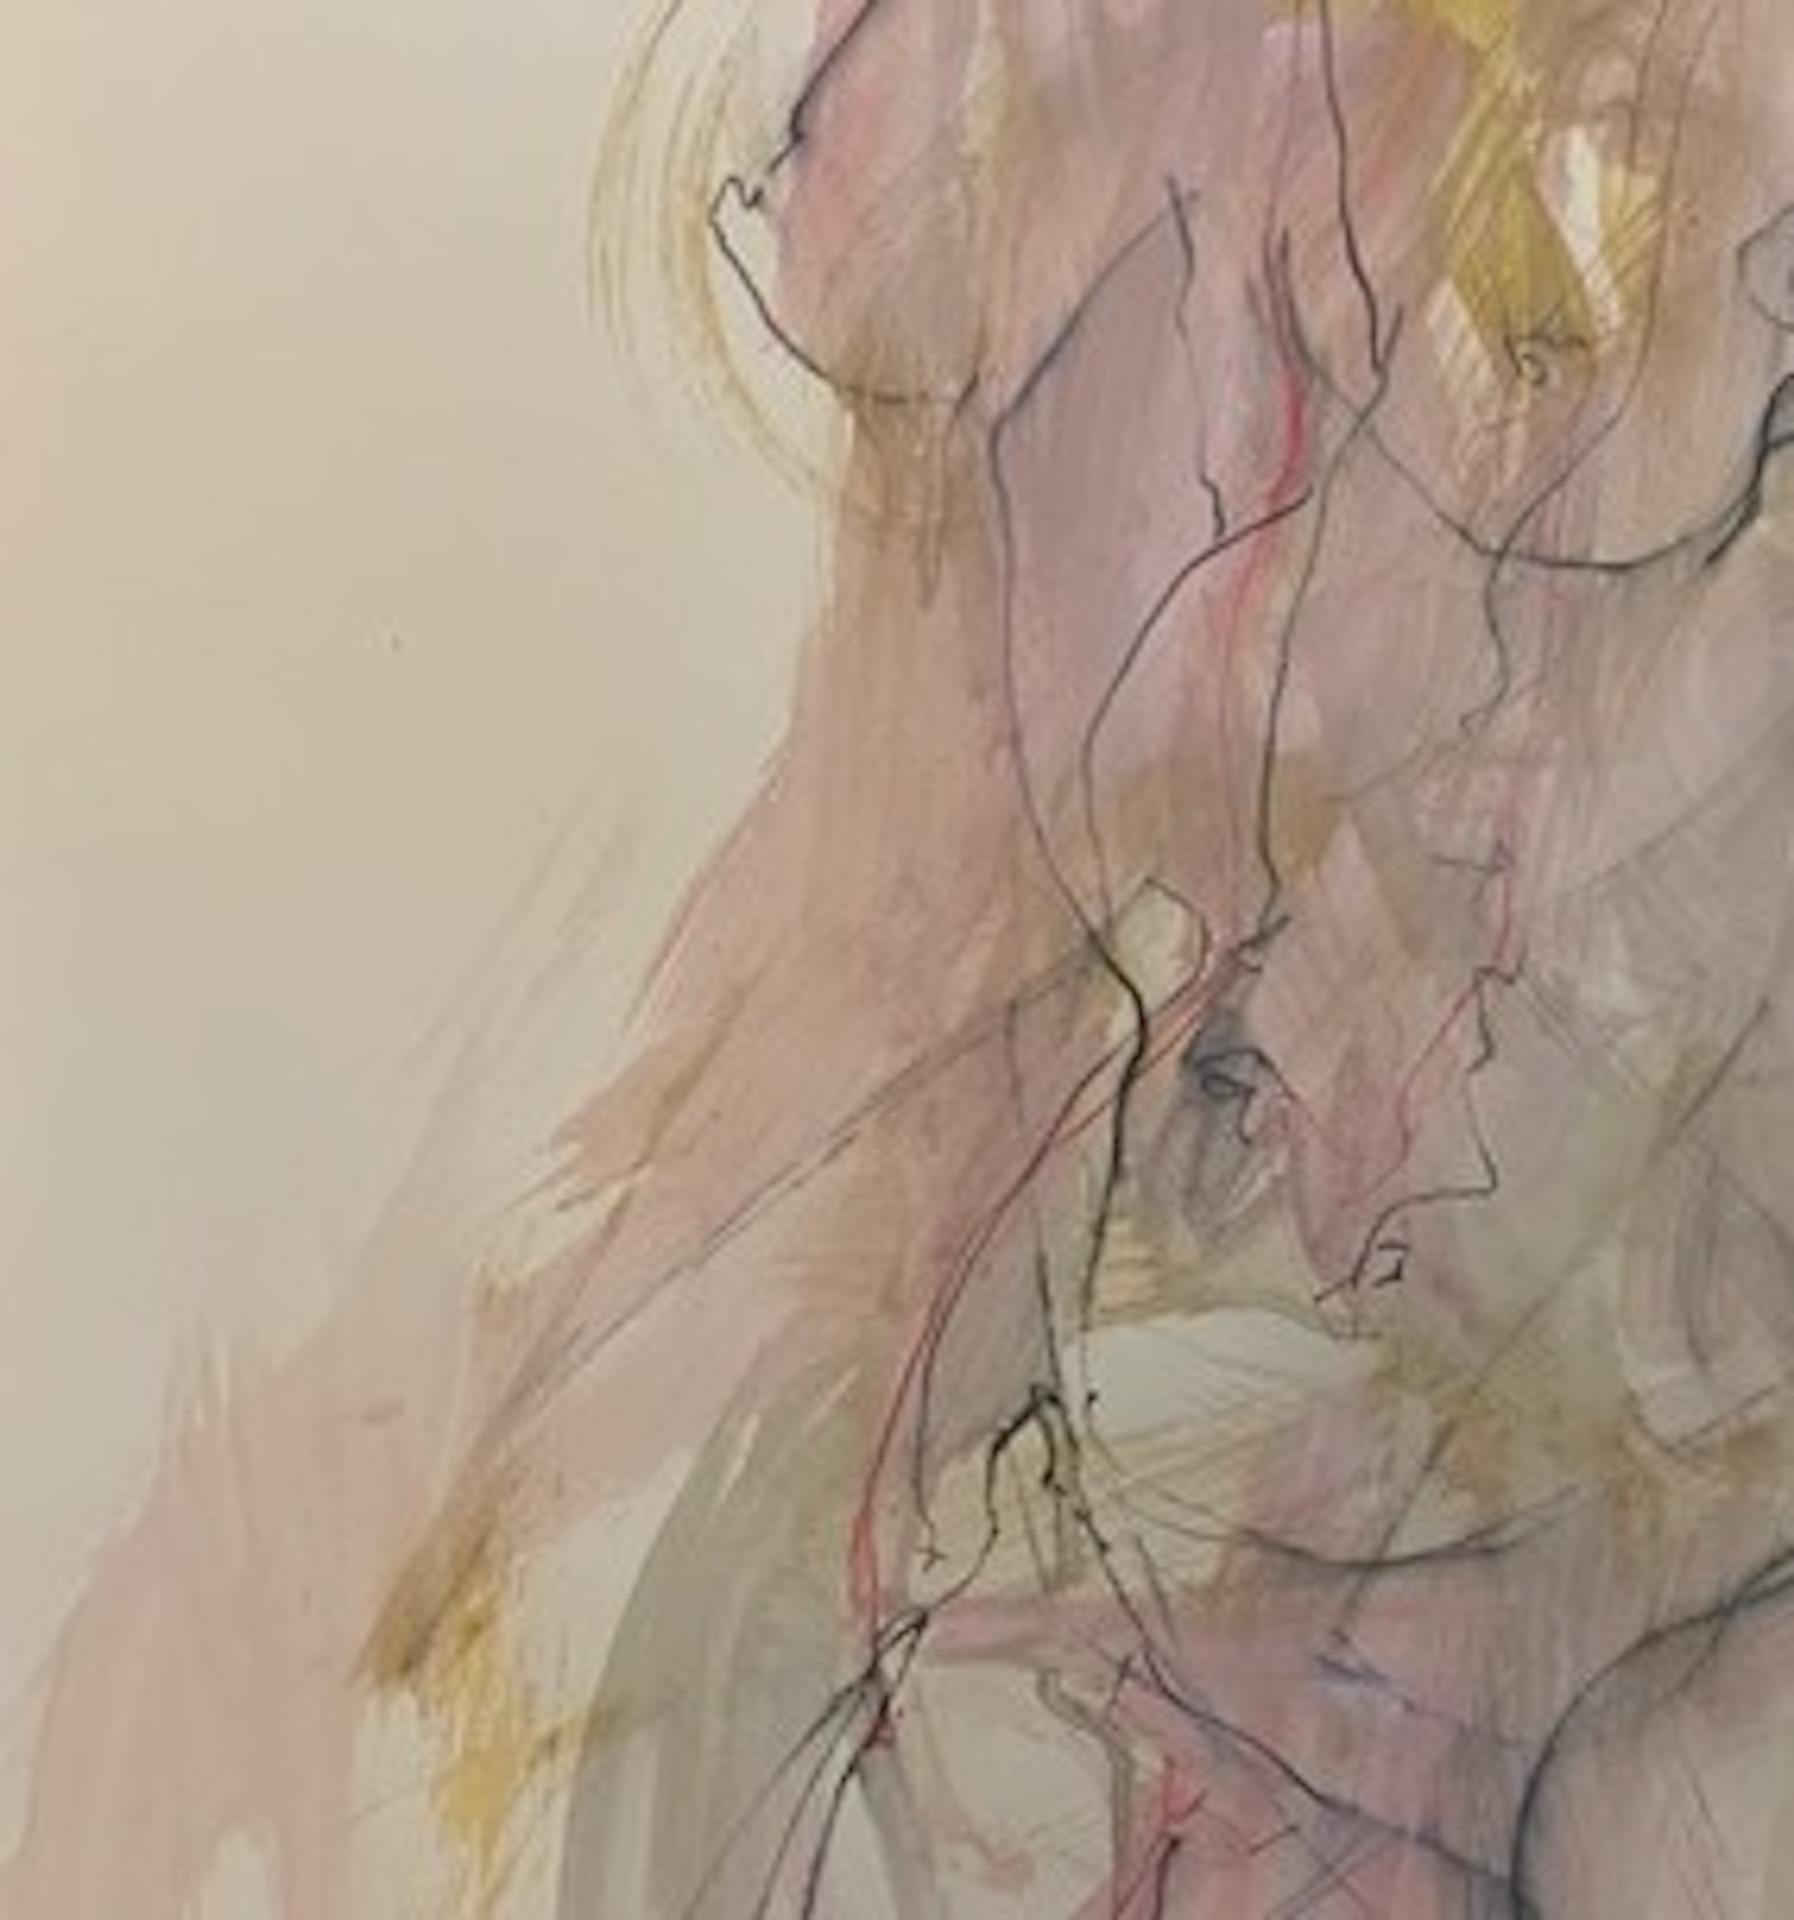 Judith Brenner
Solfrid Dancing 2
Original Figurative Drawing
Acrylic Paint, Pan Pastel, Ink and Watercolour Pencil on Paper
Sheet Size: 84.1cm x W 59.4cm x D 0.1cm
Sold Unframed
Please note that in situ images are purely an indication of how a piece